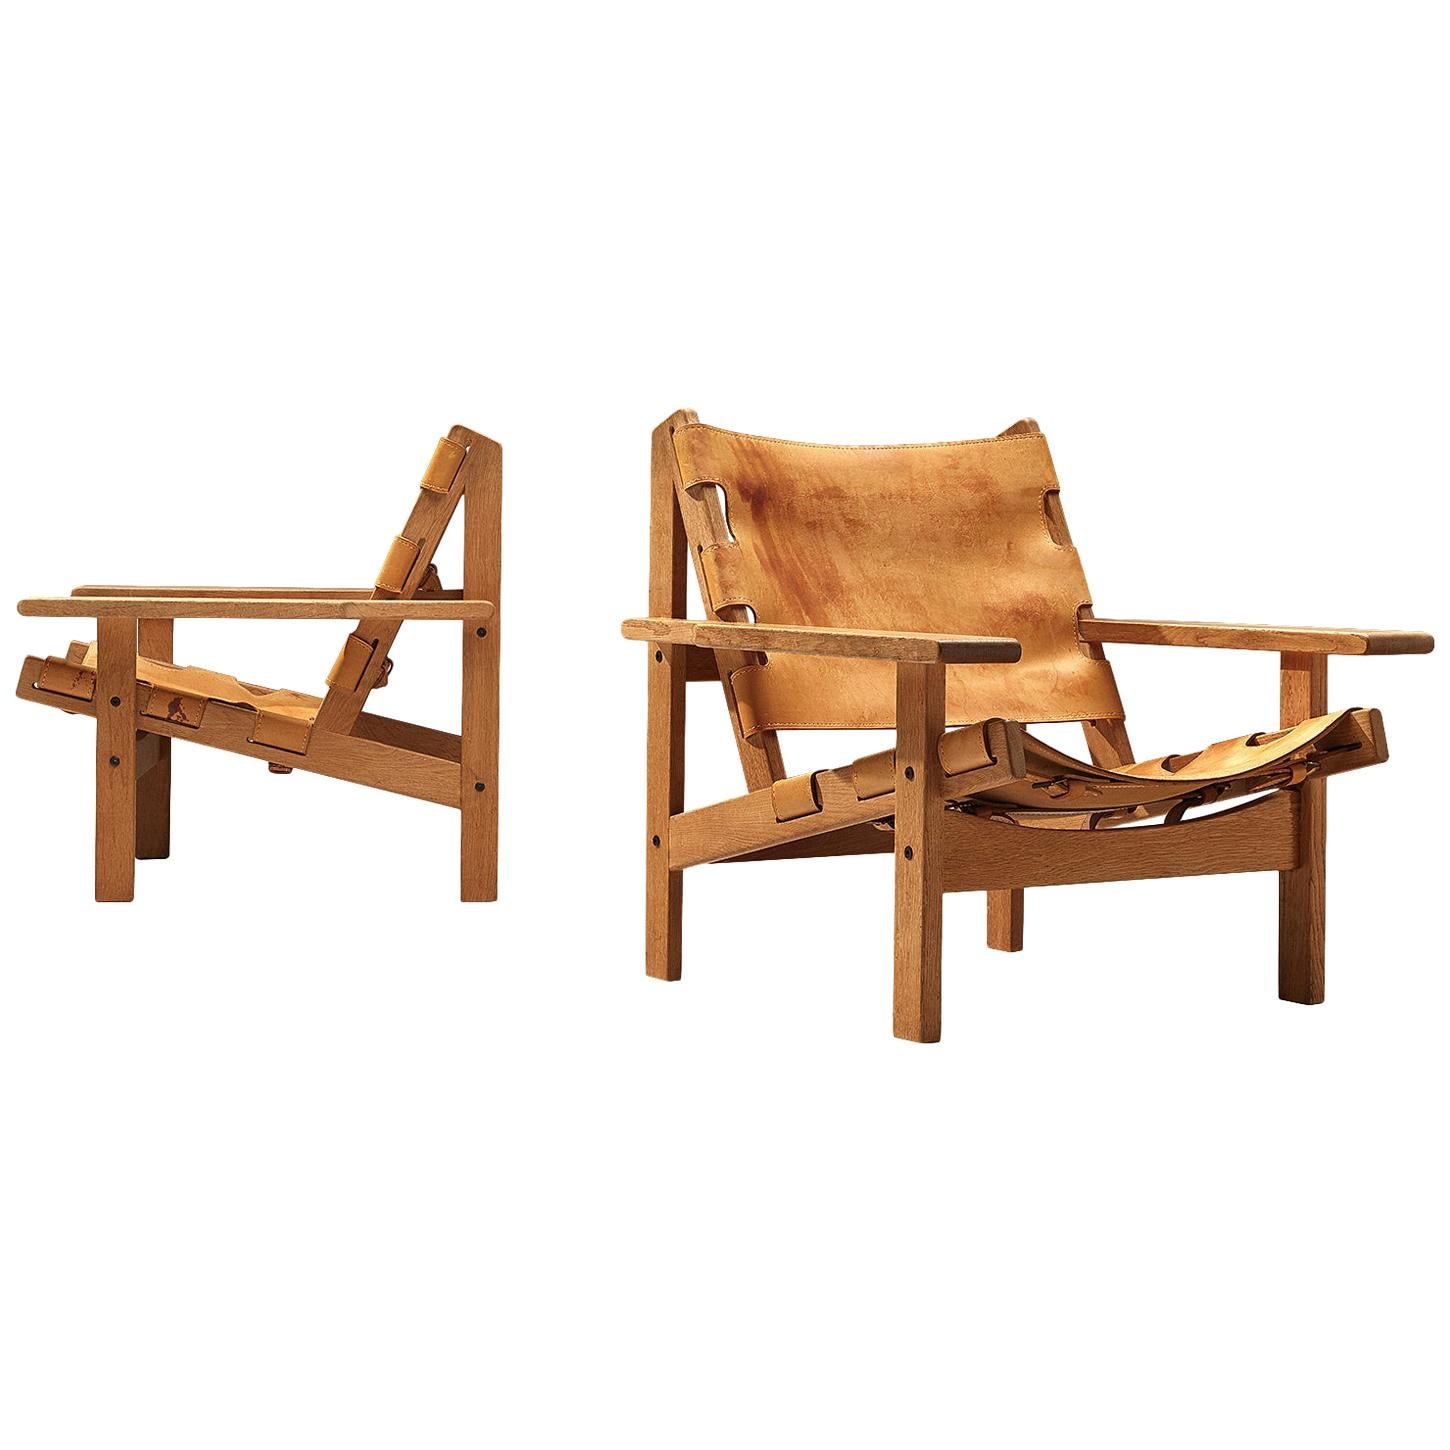 Erling Jessen Pair of Hunting Chairs in Leather and Oak